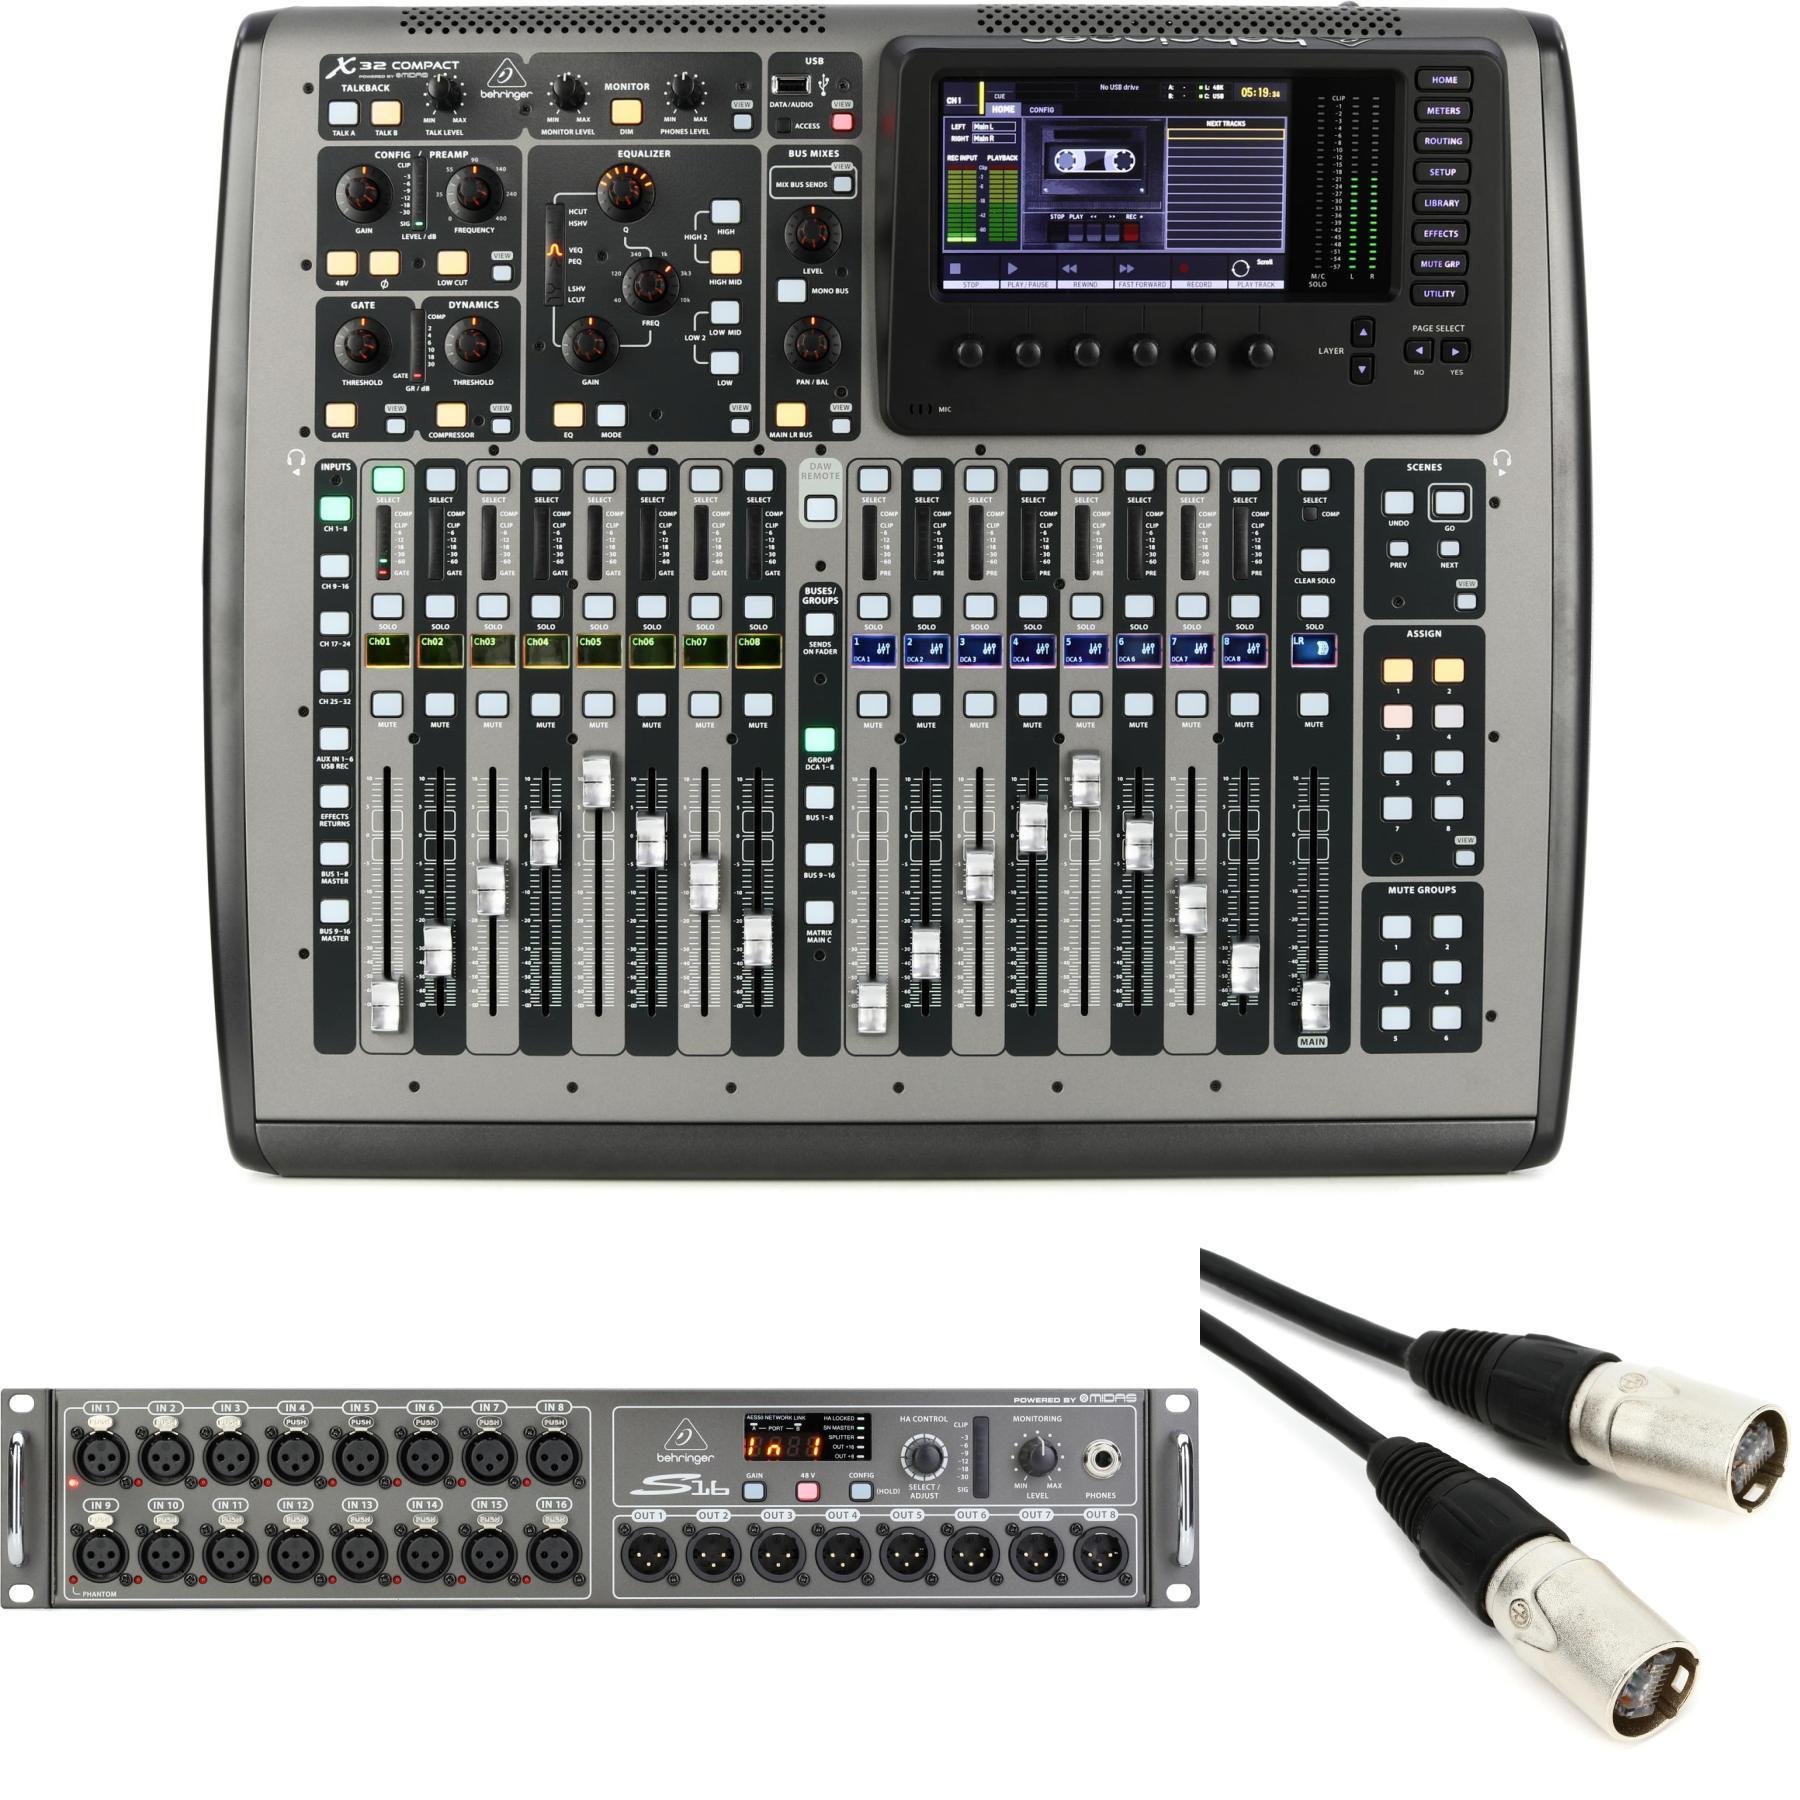 behringer x32 compact